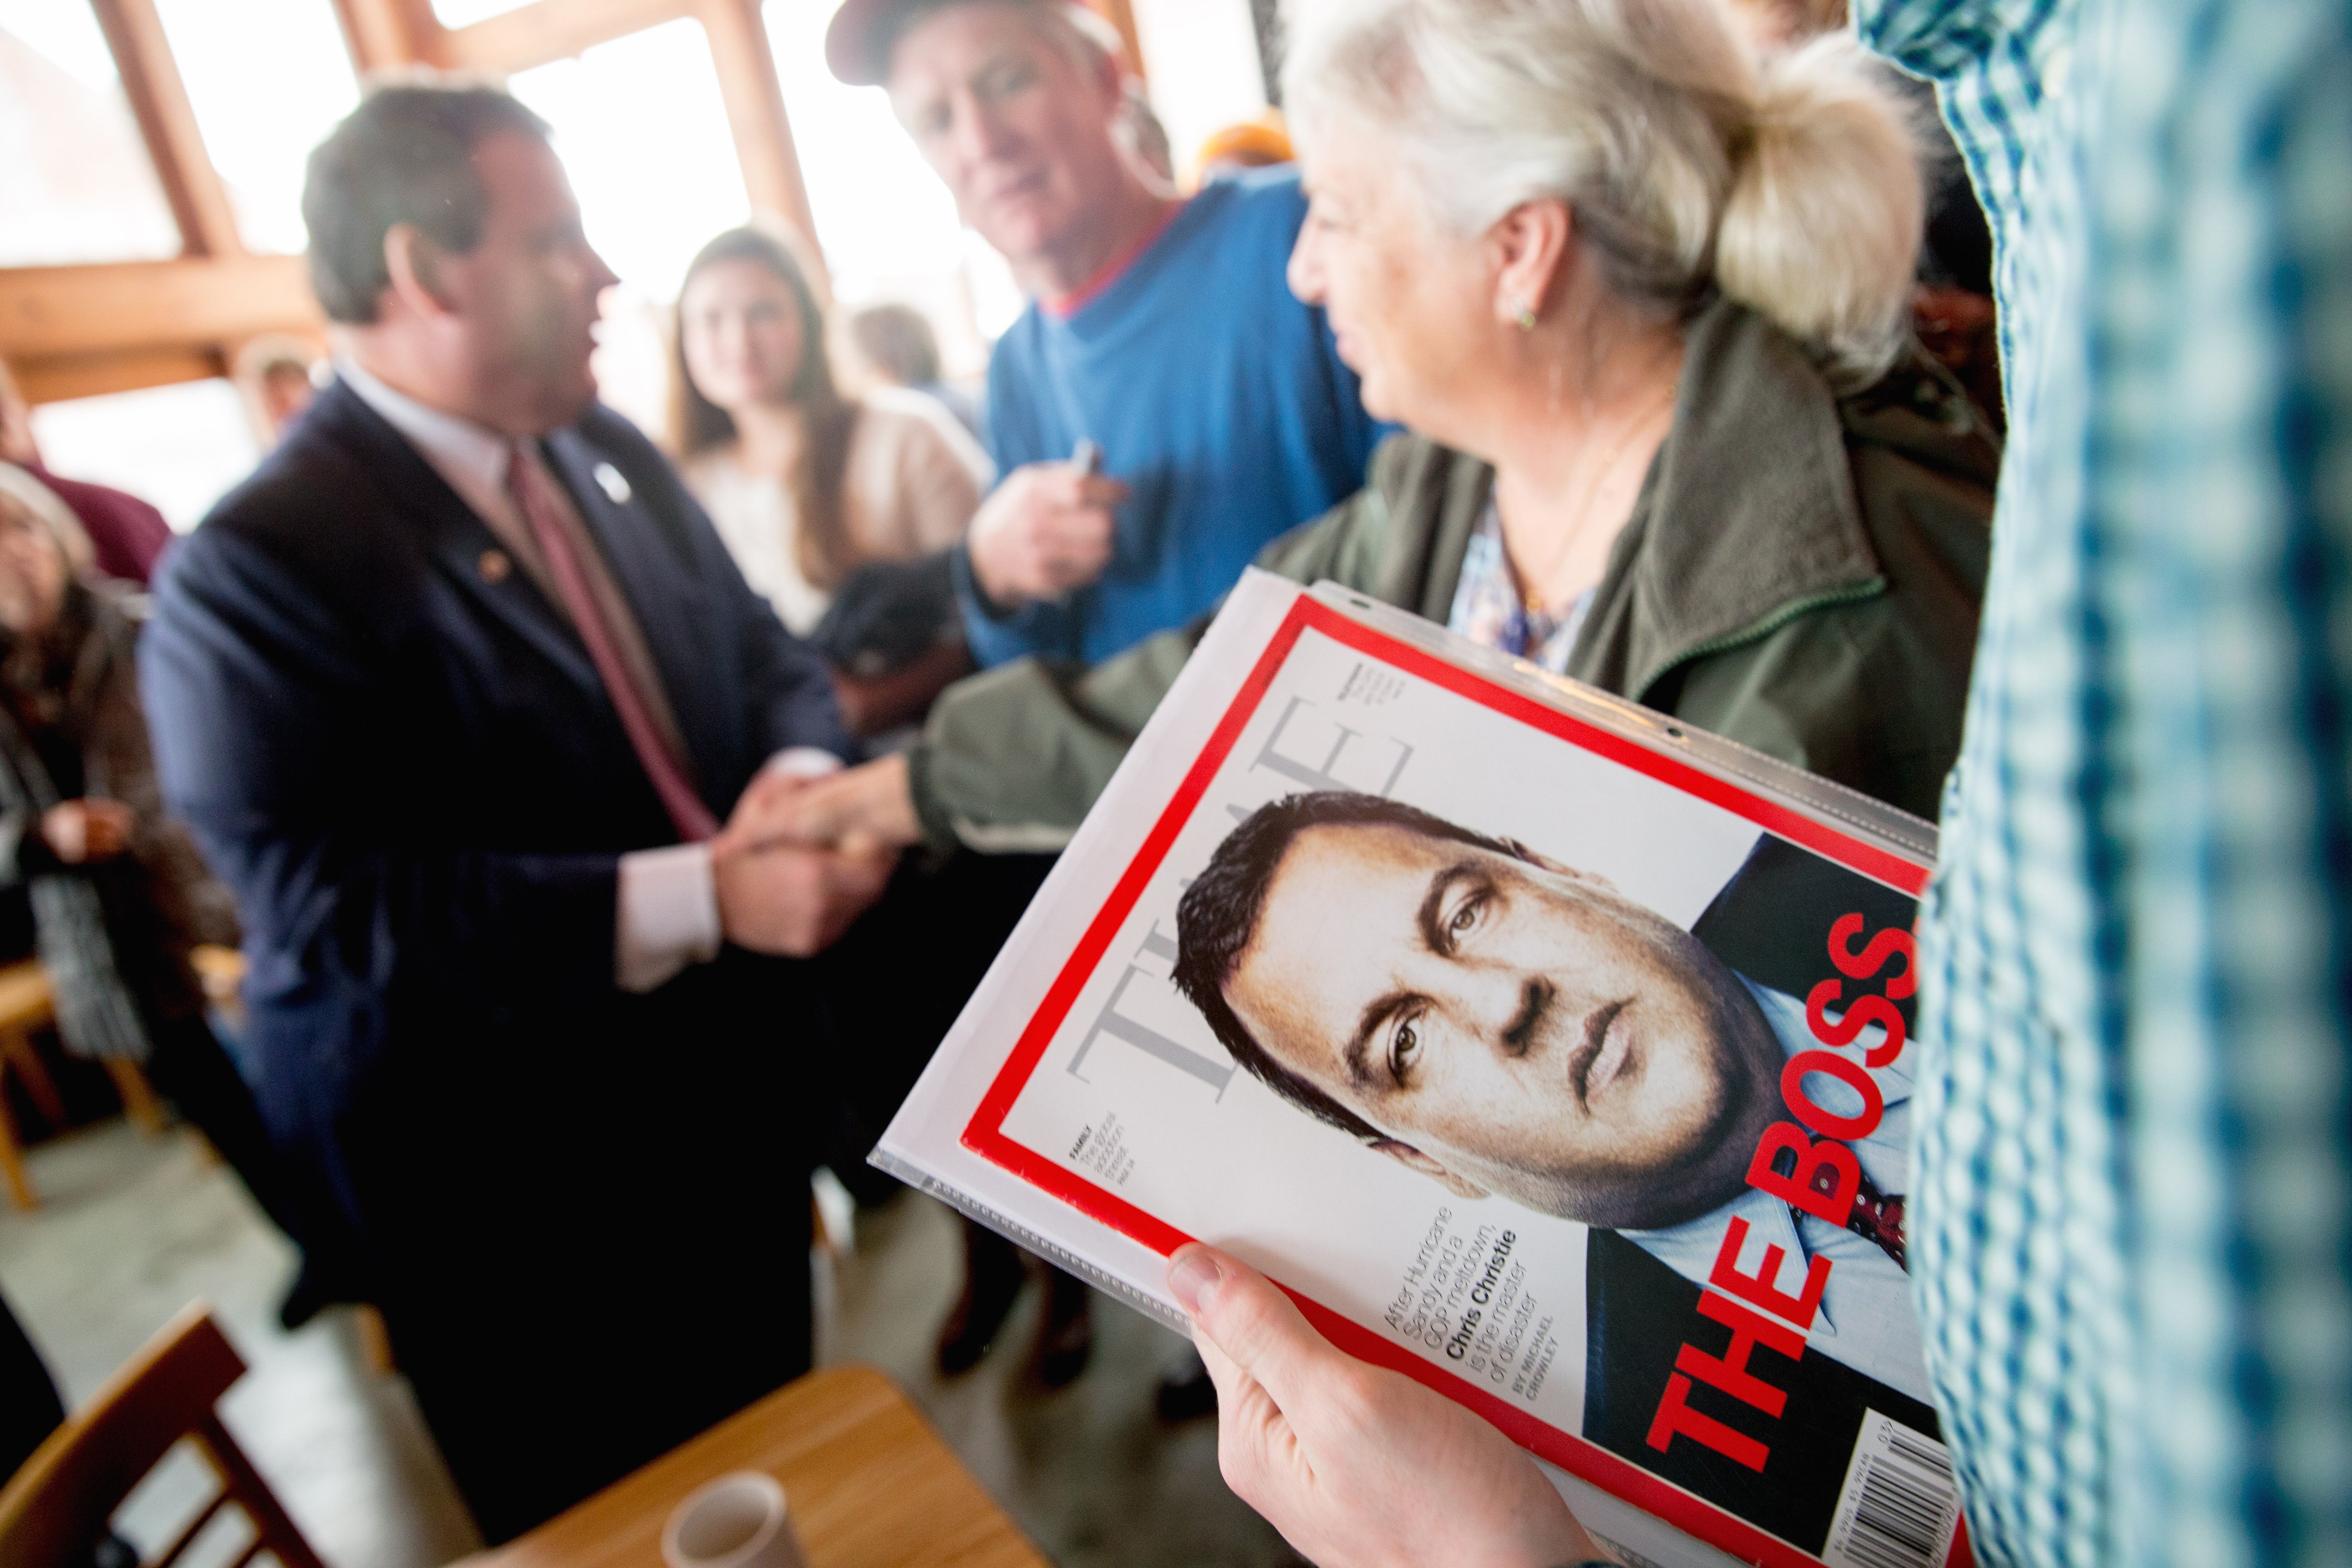 A visitor holds a Time Magazine depicting Republican presidential candidate, New Jersey Gov. Chris Christie after he spoke at Elly's Tea and Coffee House in Muscatine, Iowa, Tuesday, Dec. 29, 2015. (Andrew Harnik—AP)